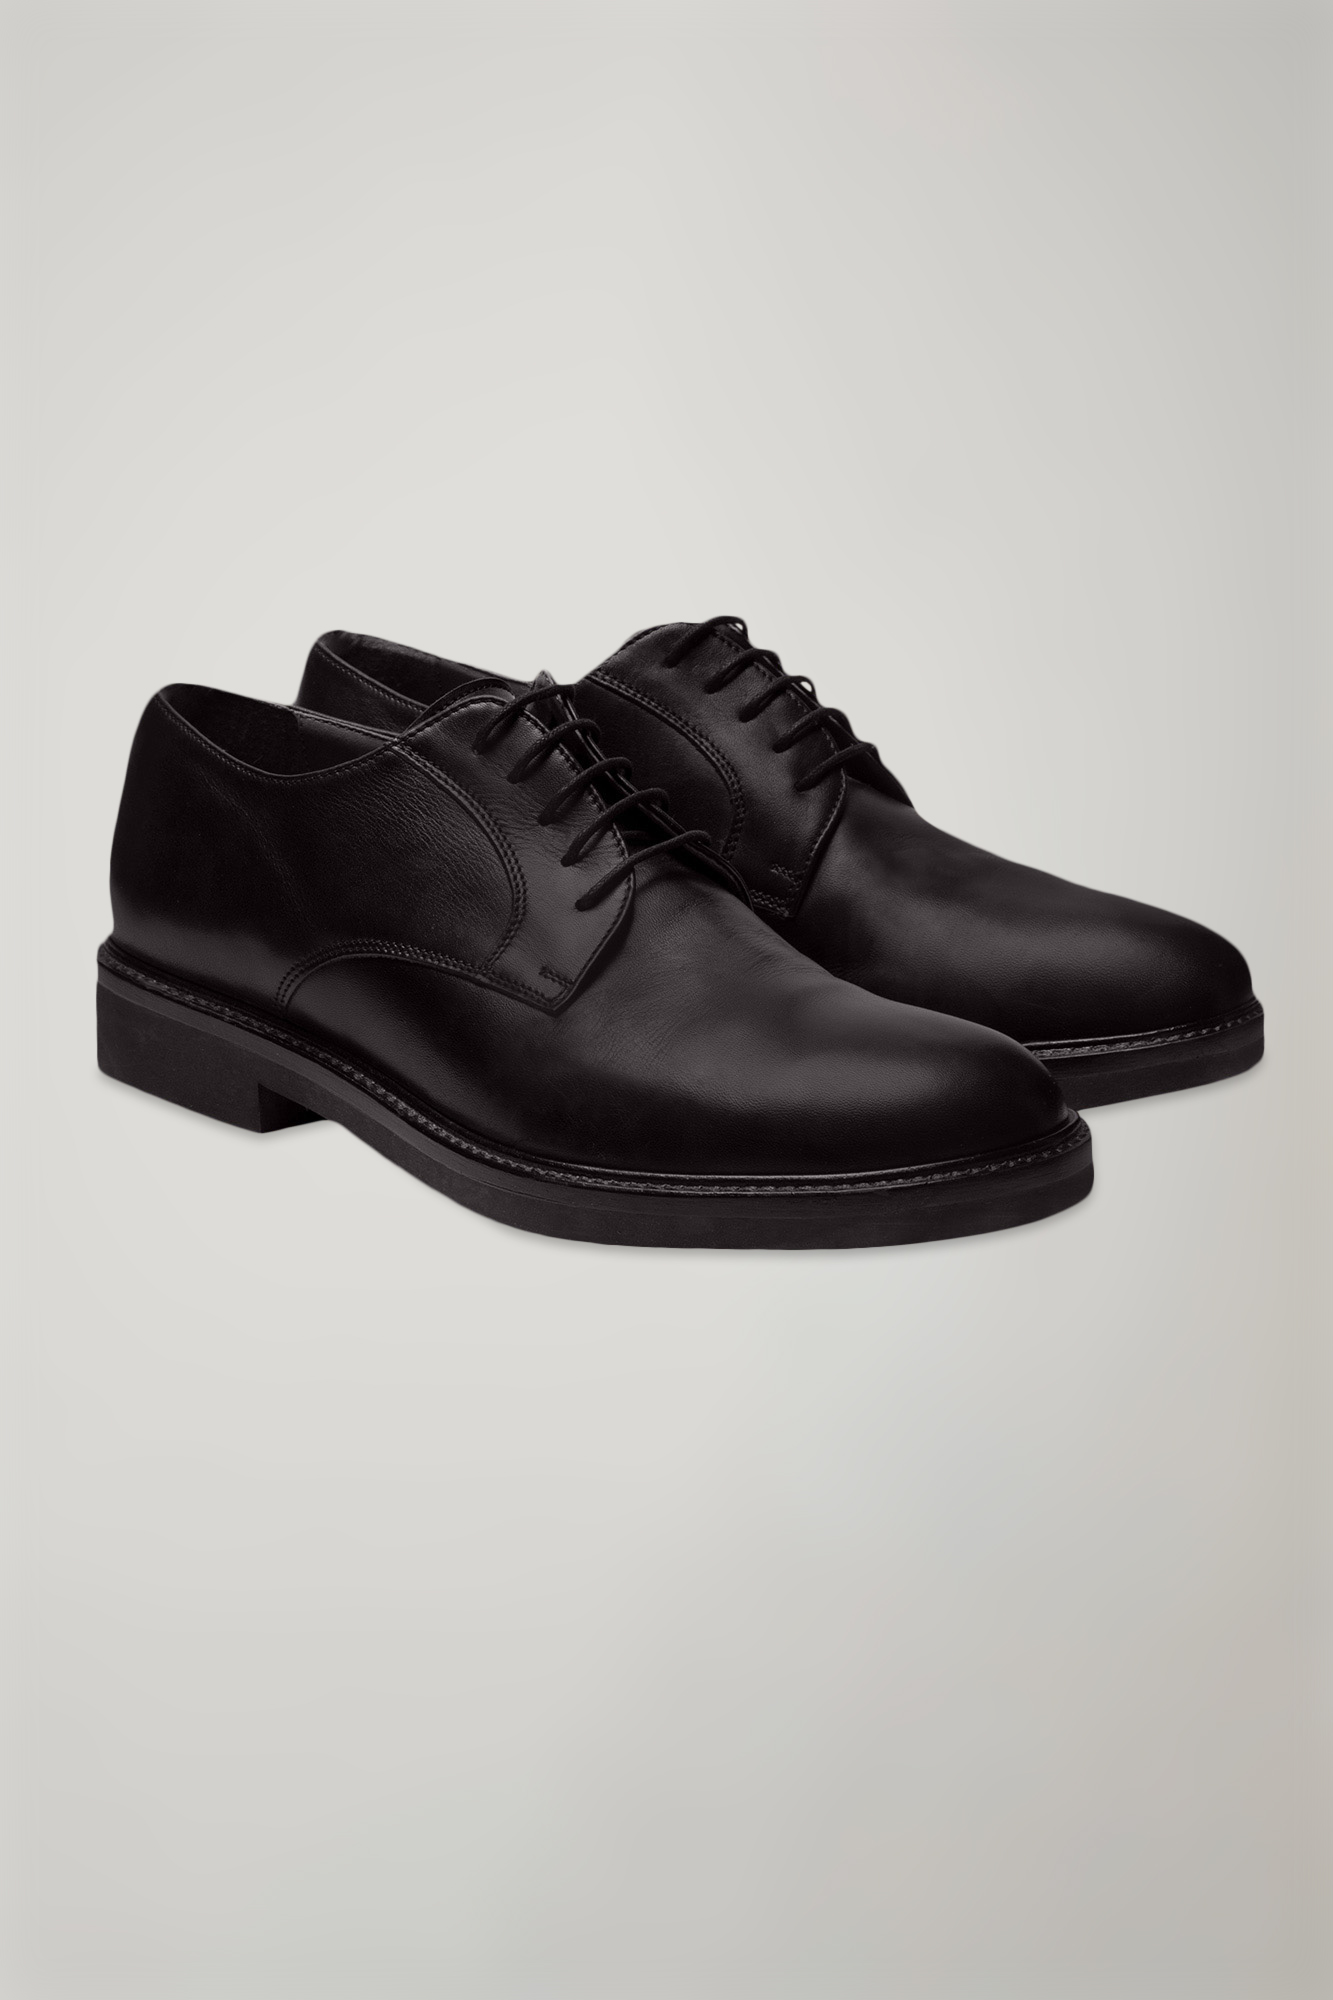 Derby shoes 100% leather